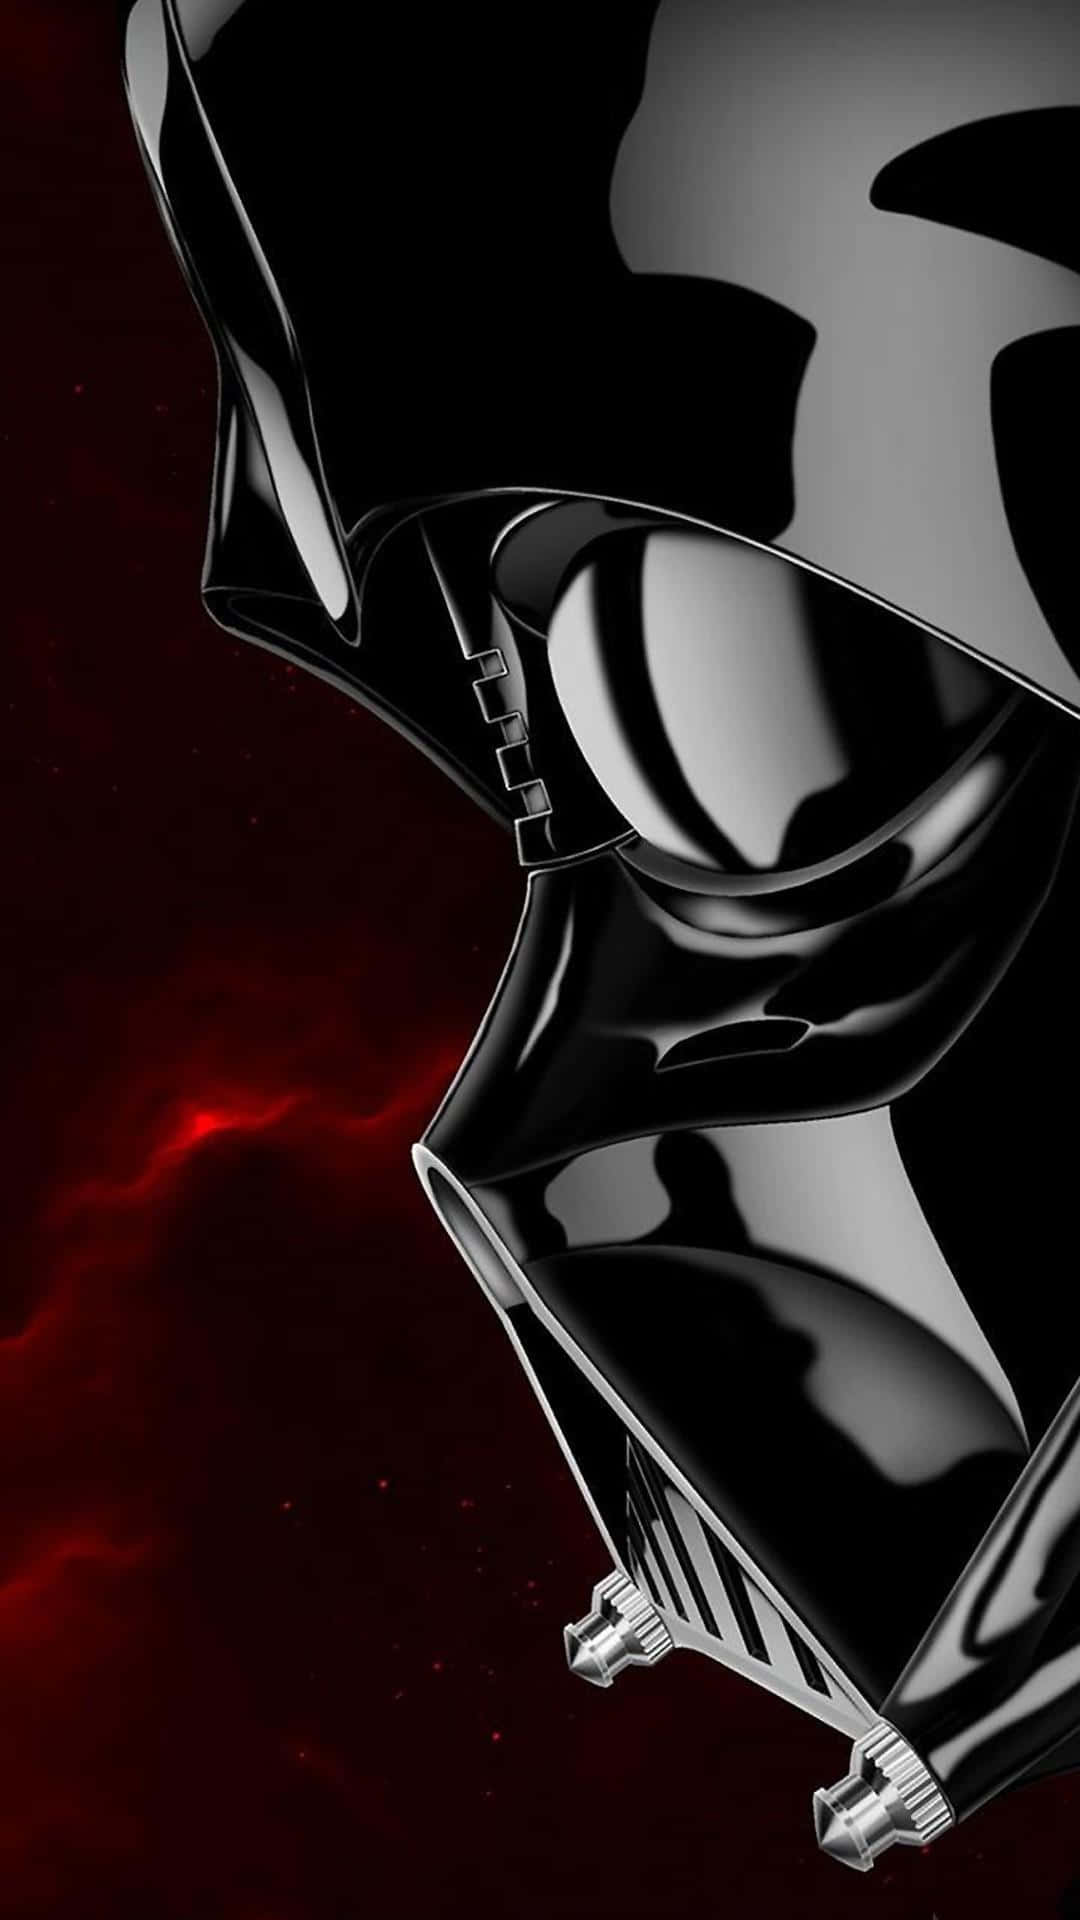 “Take your Galaxy Far, Far Away with the Star Wars Phone” Wallpaper